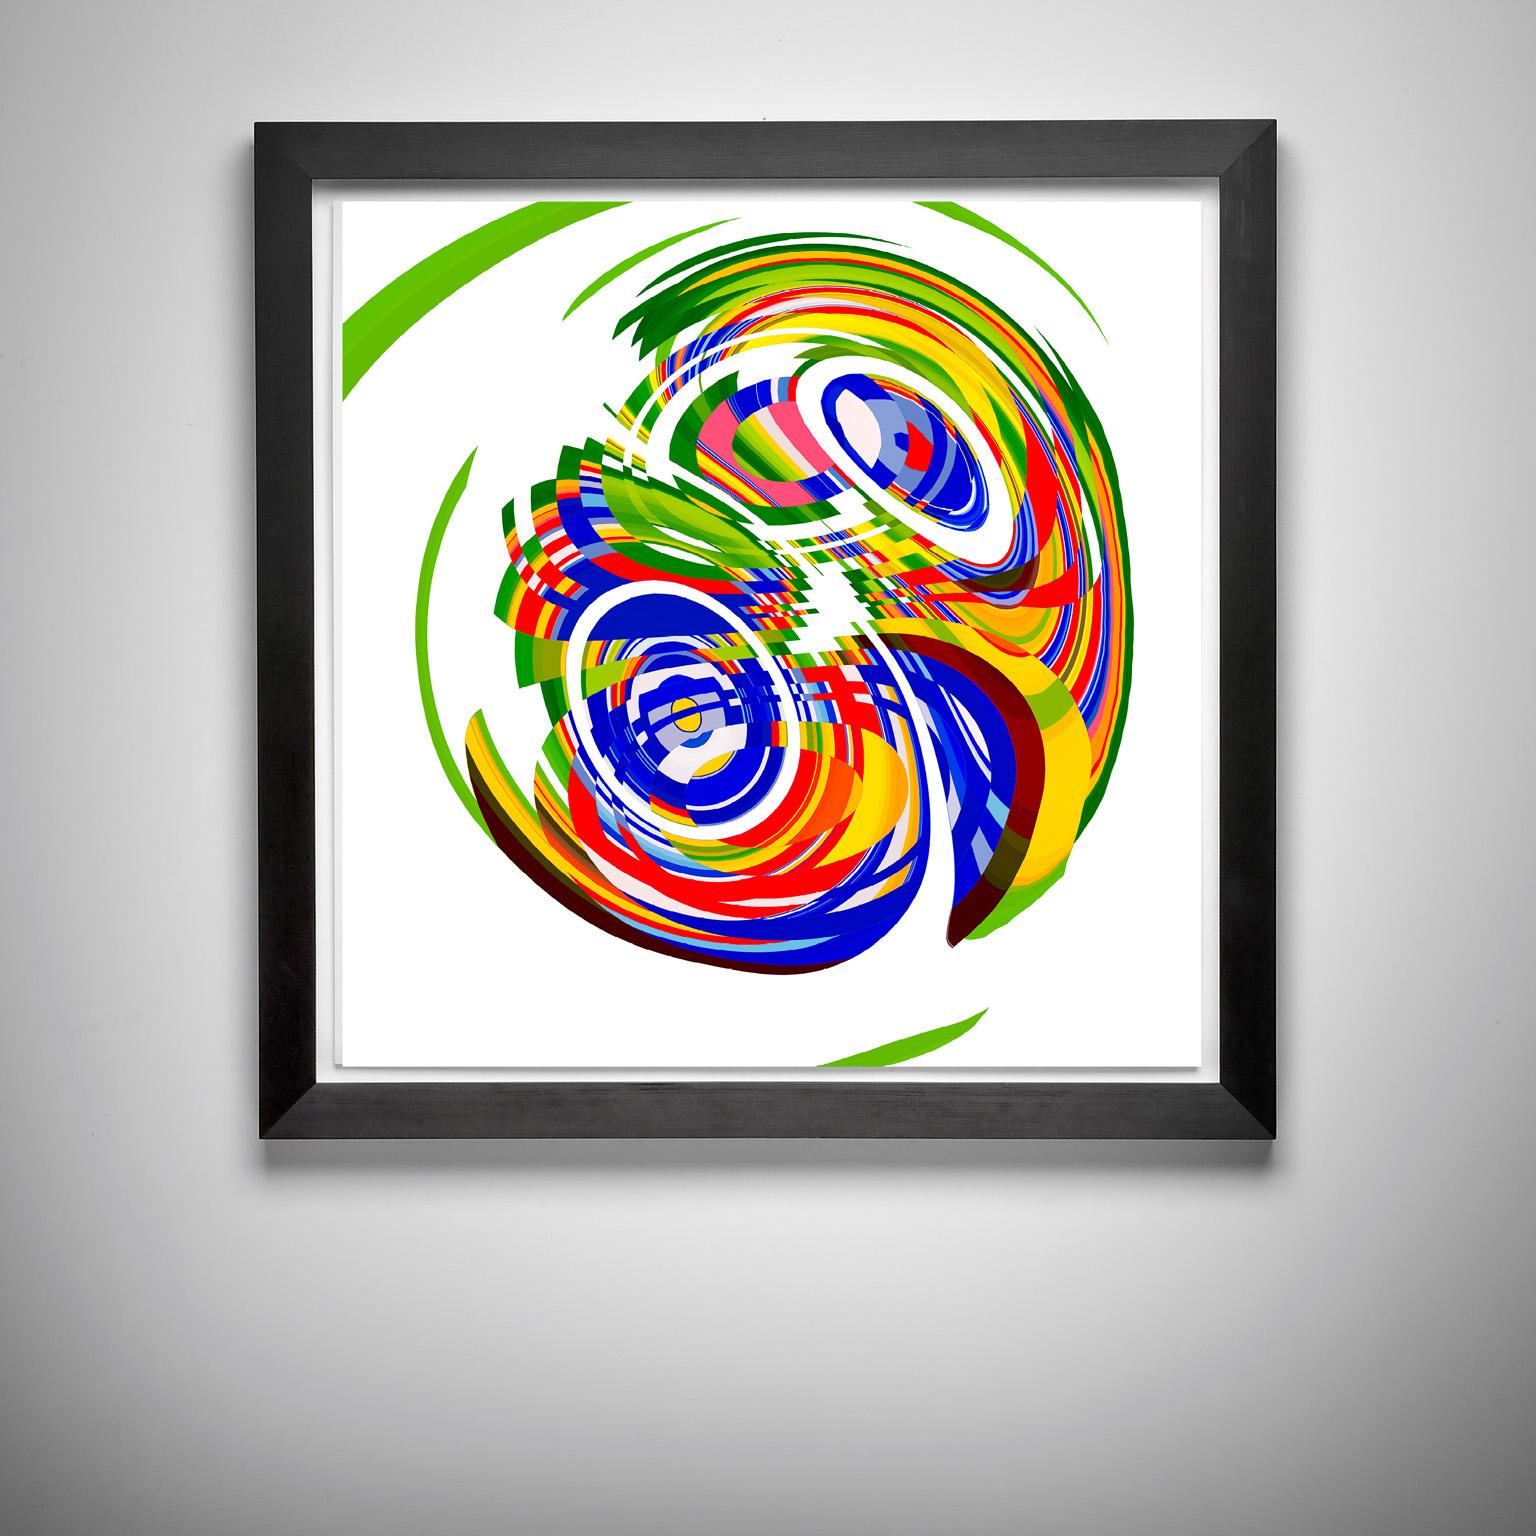 Jelcoba_ Spiral Deconstructed _5, 24 x 24, 1/ 200 ed. (unframed) - Print by Paul-Émile Rioux